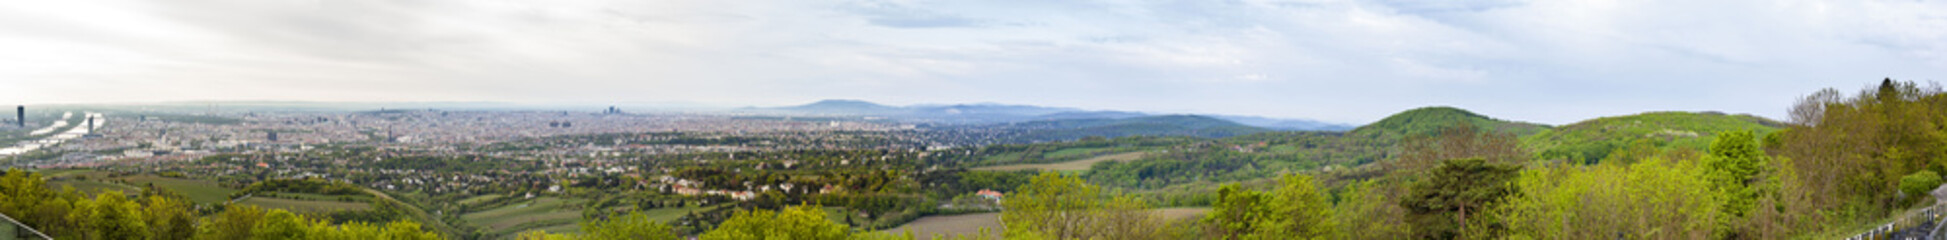 panorama of vienna with the suburbs and river danube